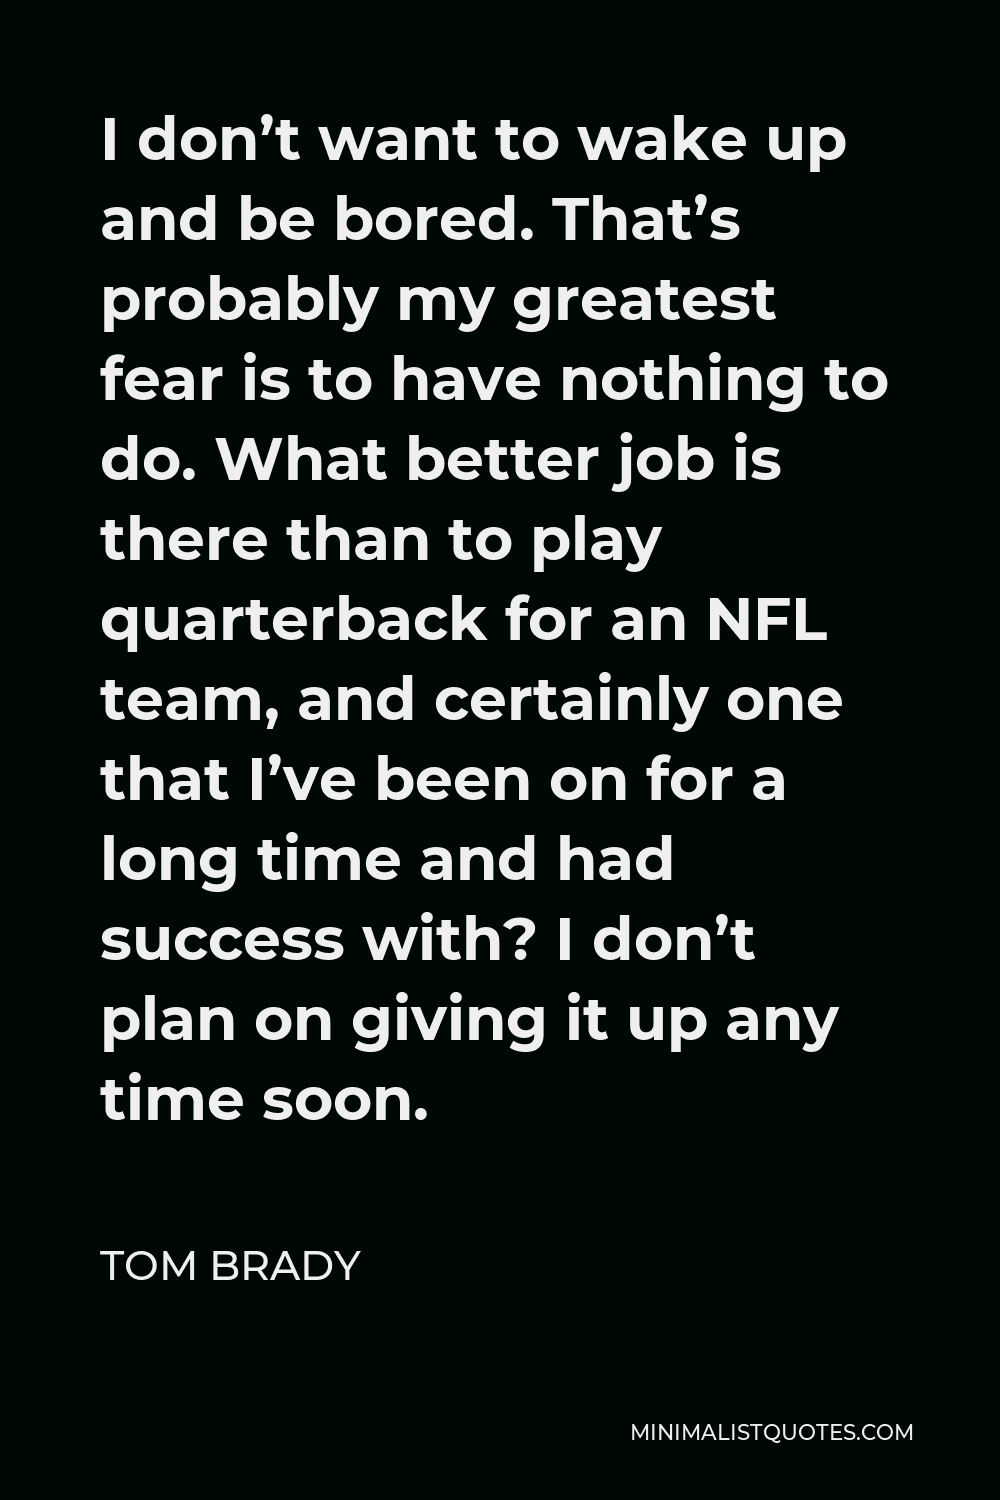 Tom Brady Quote - I don’t want to wake up and be bored. That’s probably my greatest fear is to have nothing to do. What better job is there than to play quarterback for an NFL team, and certainly one that I’ve been on for a long time and had success with? I don’t plan on giving it up any time soon.